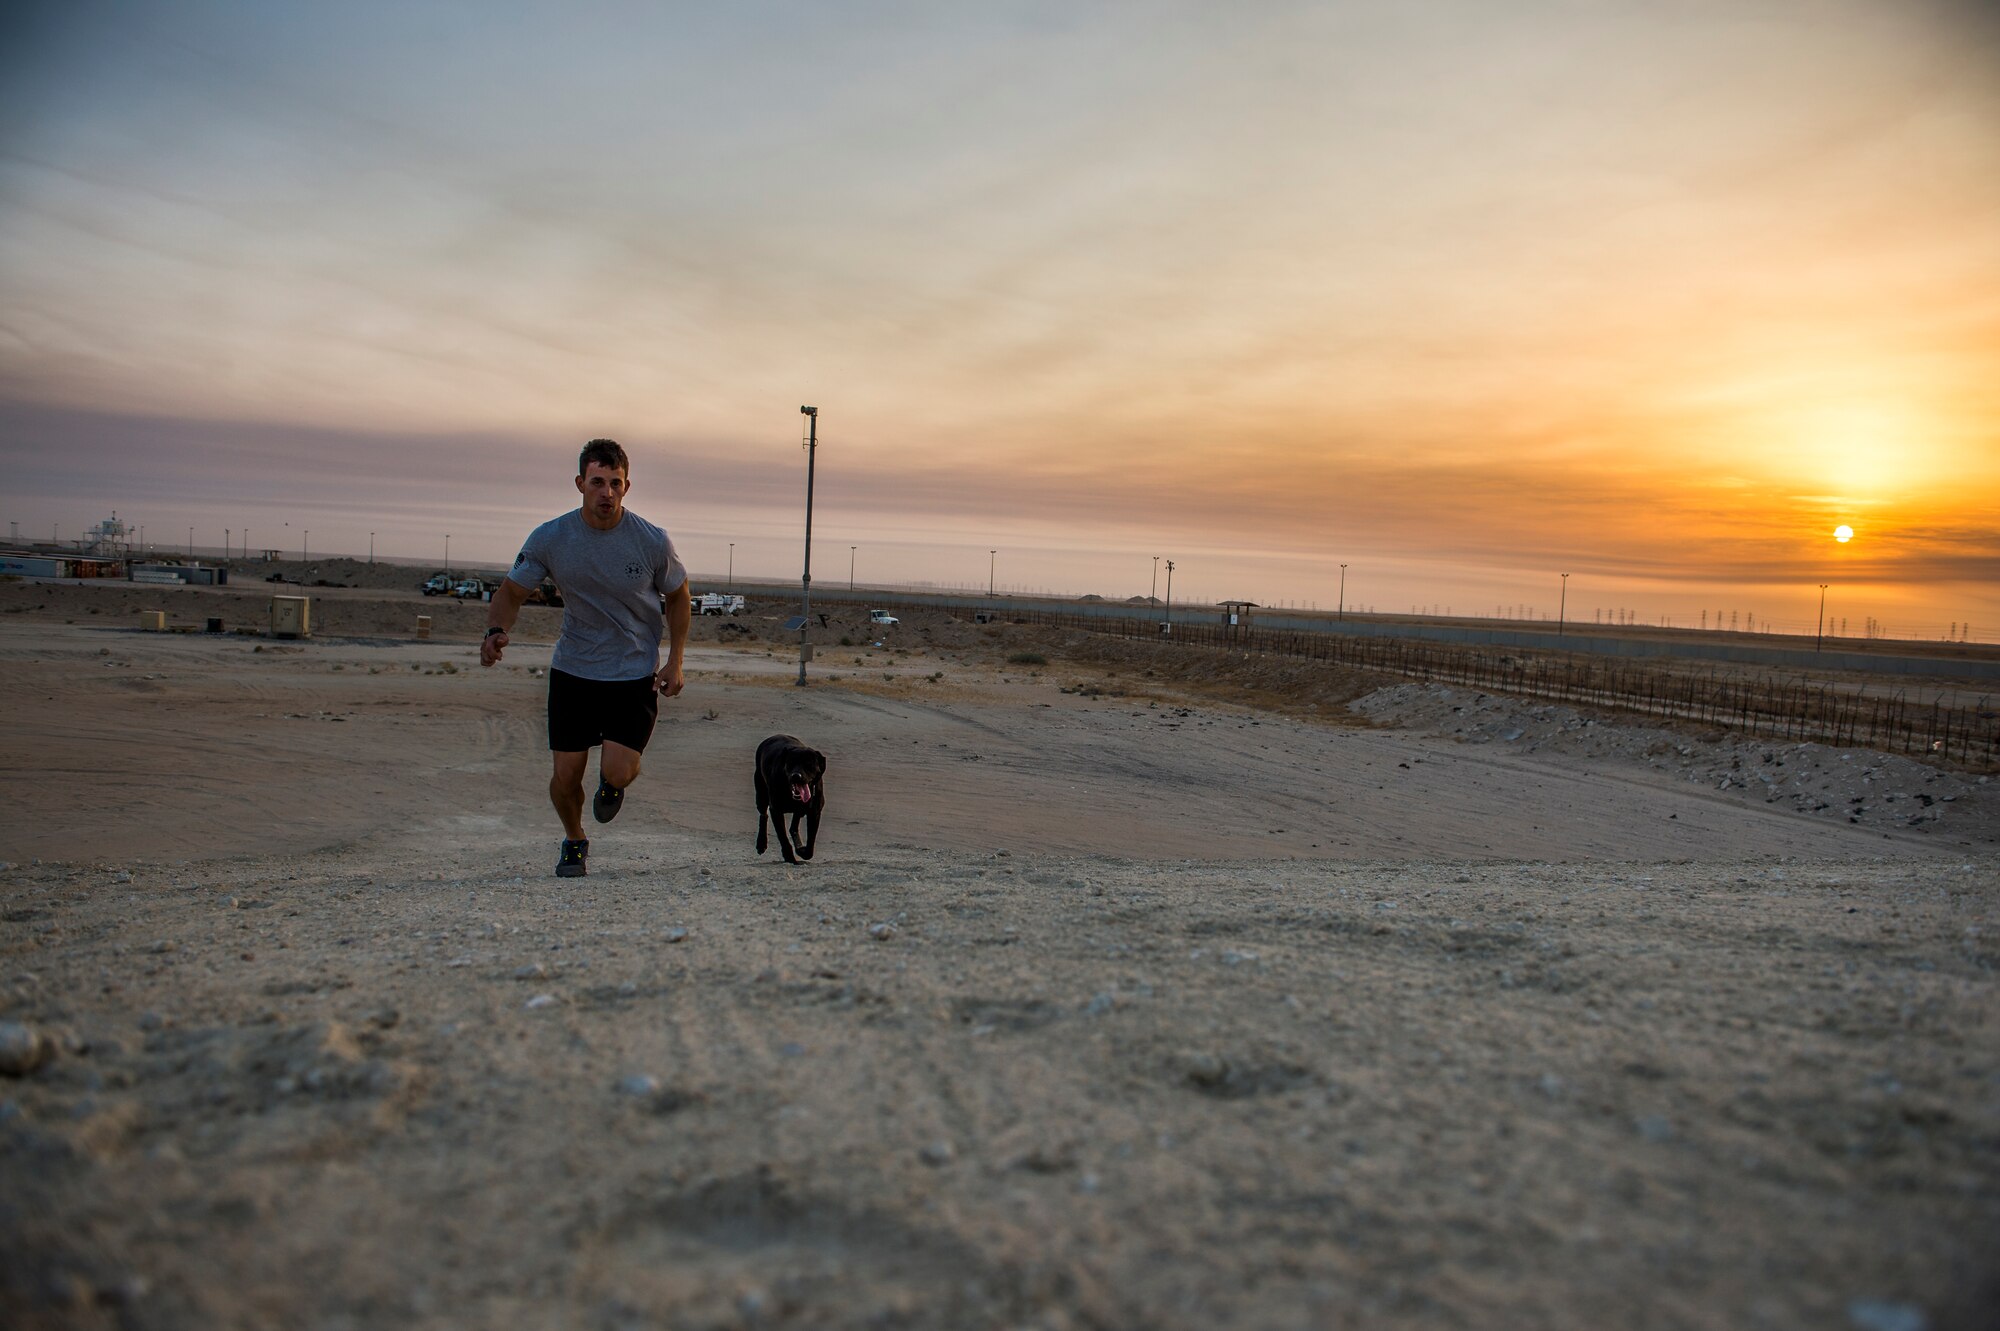 U.S Air Force Staff Sgt. Jesse Galvan, 386th Expeditionary Security Forces Squadron military working dog handler, runs in the early morning with his dog, Ritz, July 19, 2014 at an undisclosed location in Southwest Asia. Galvan has been partnered with Ritz for two and a half years and deployed twice with her. The Dallas-Ft. Worth native deployed here from Tinker Air Force Base, Oklahoma in support of Operation Enduring Freedom. (U.S. Air Force photo by Staff Sgt. Jeremy Bowcock)